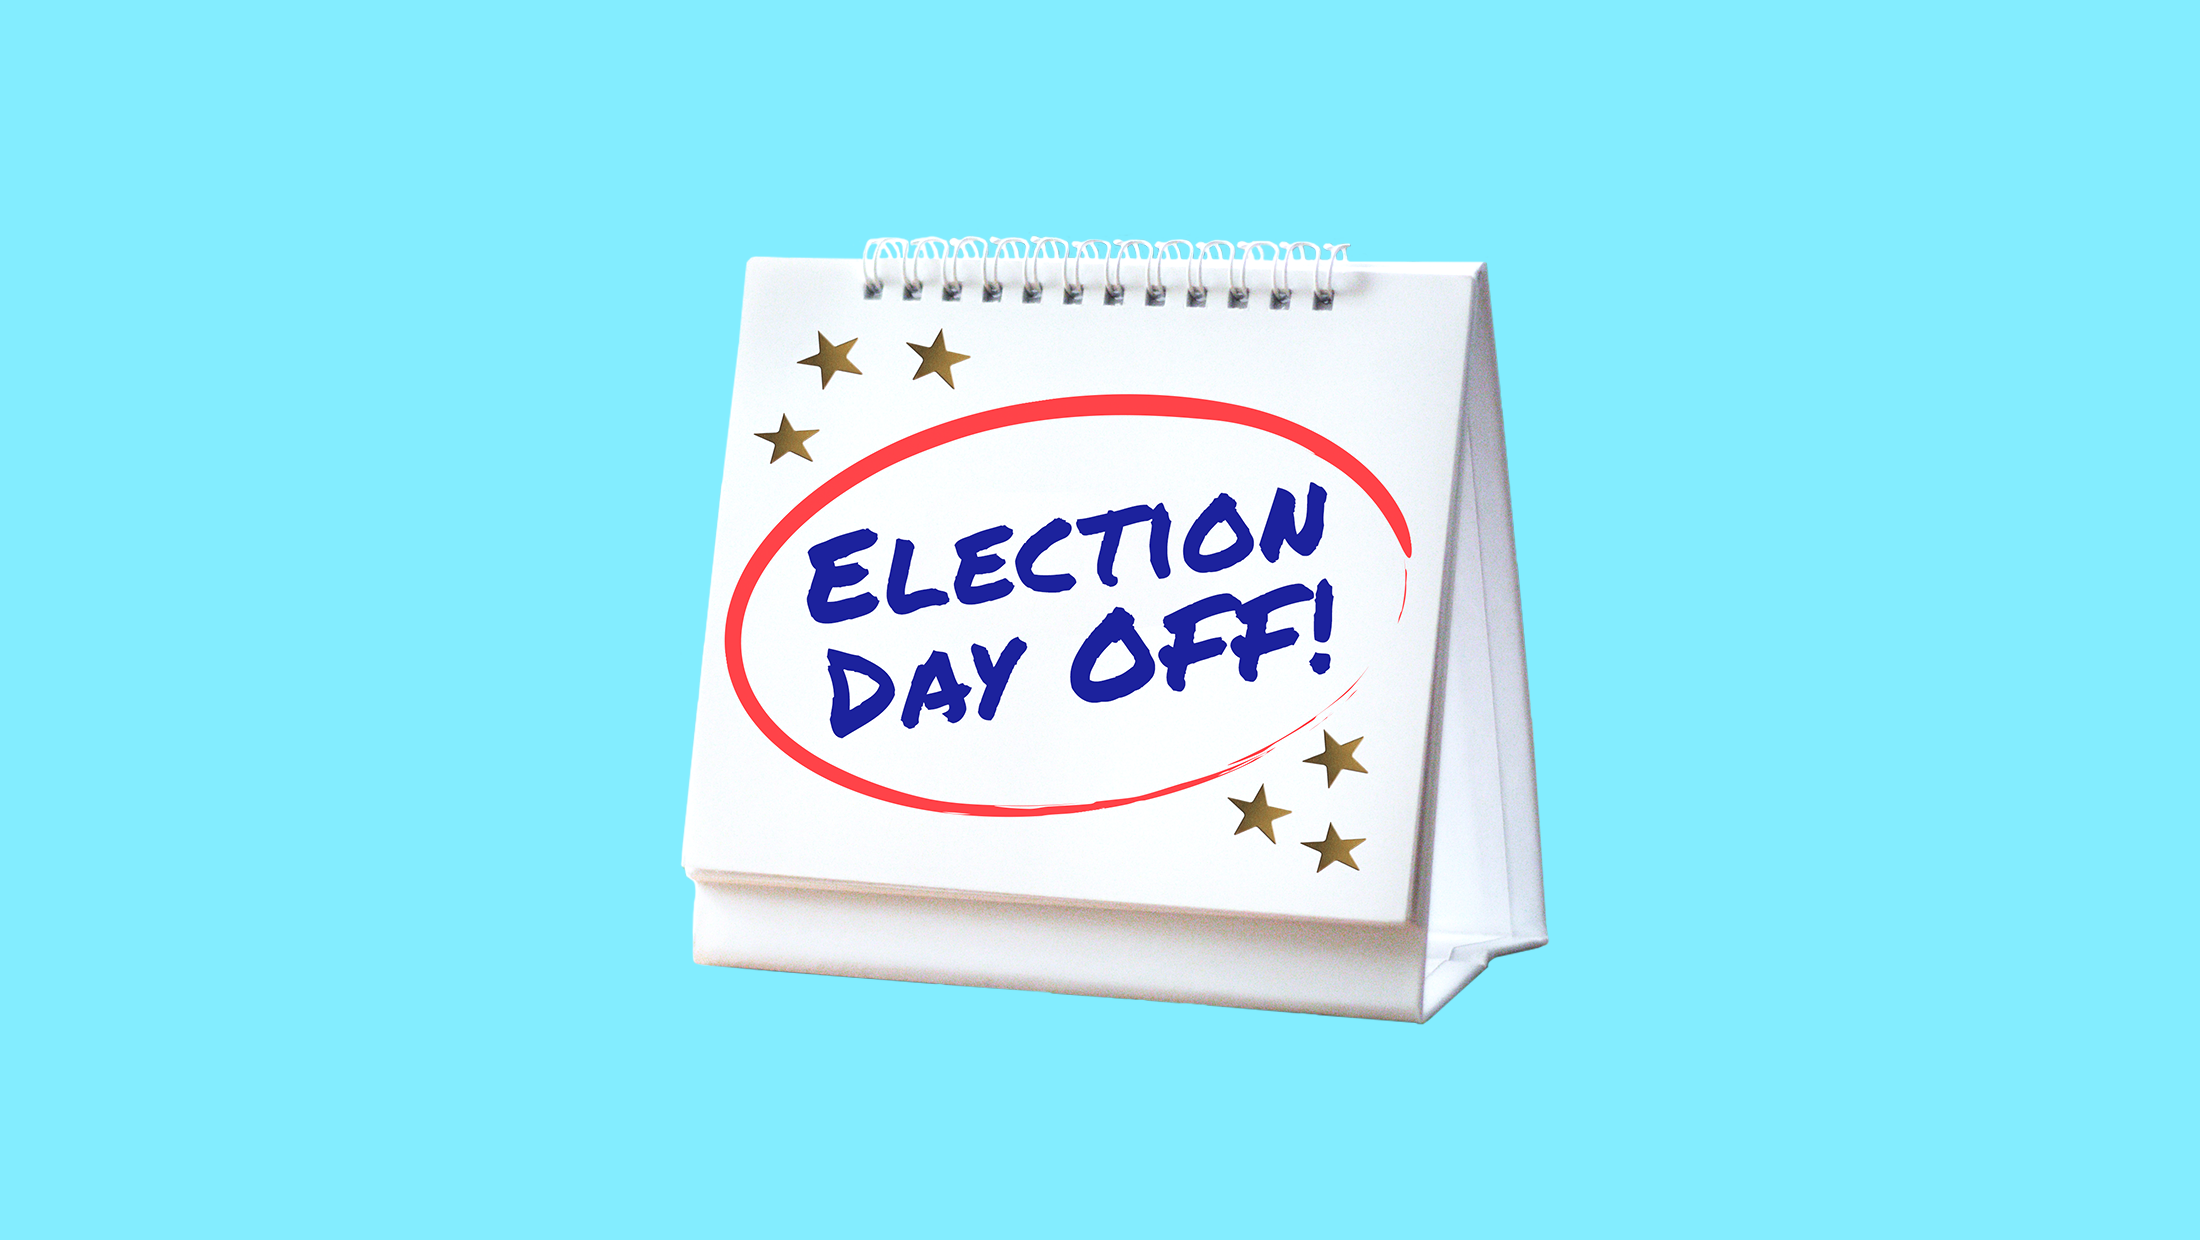 A small spiral flip notebook with the words "ELECTION DAY OFF" circled